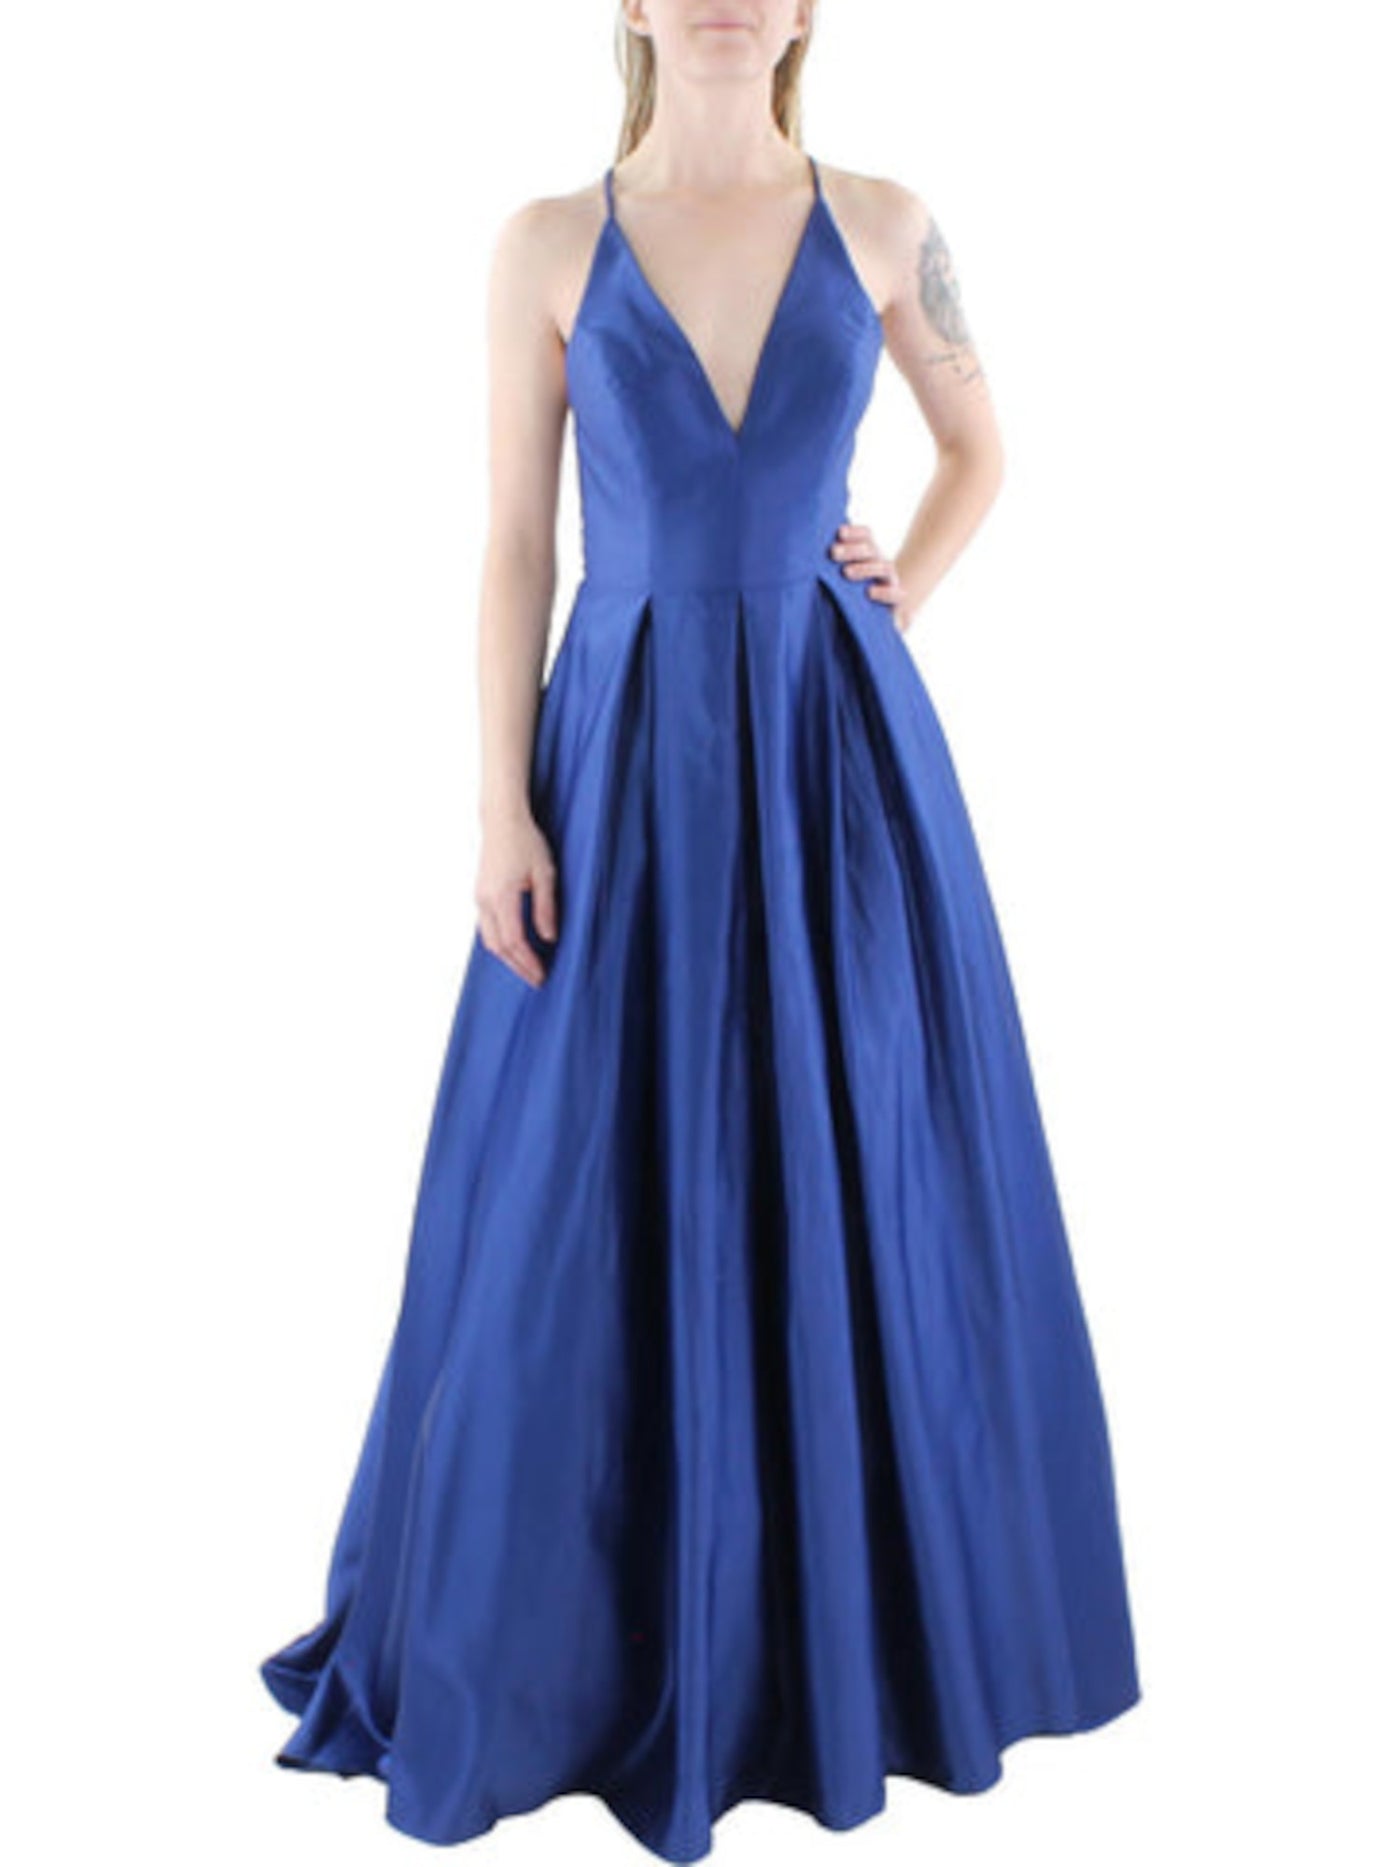 BLONDIE NITES Womens Blue Zippered Pocketed Illusion Strappy Back Bodice Spaghetti Strap V Neck Full-Length Evening Gown Dress Juniors 5